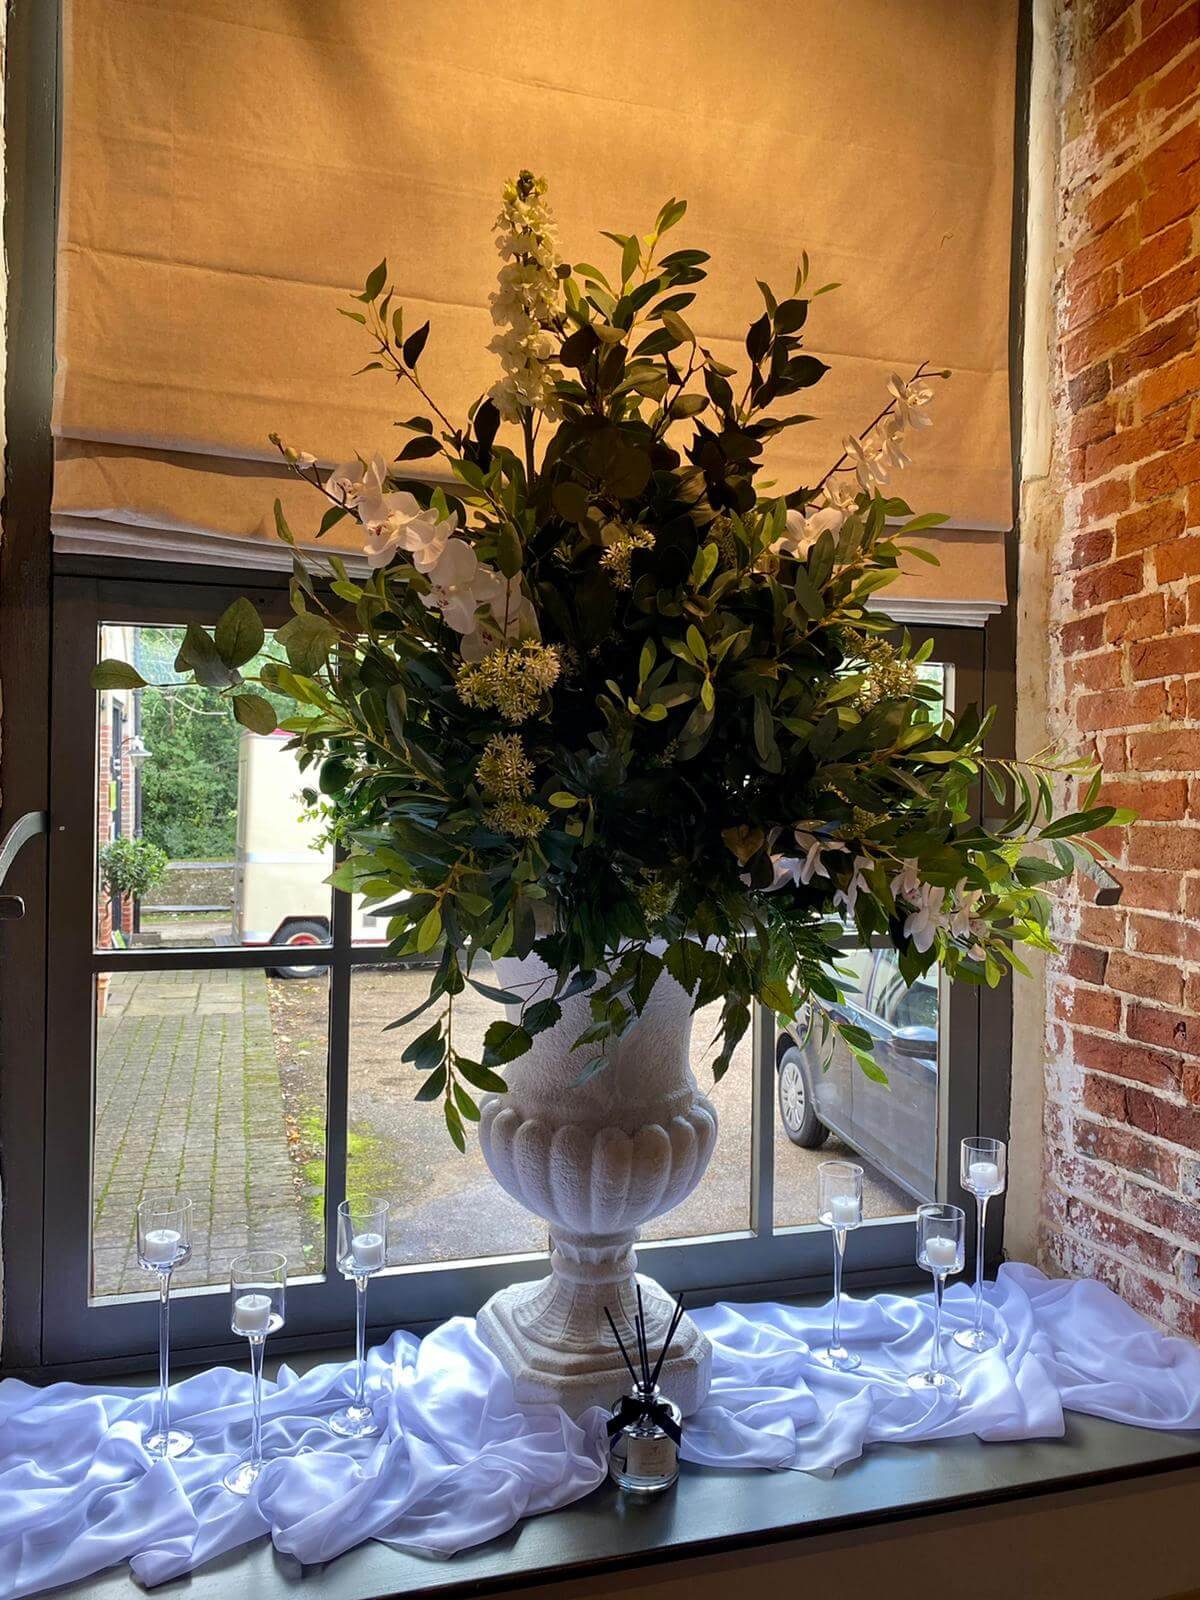 Faux Foliage and faux floral in Urn.jpg